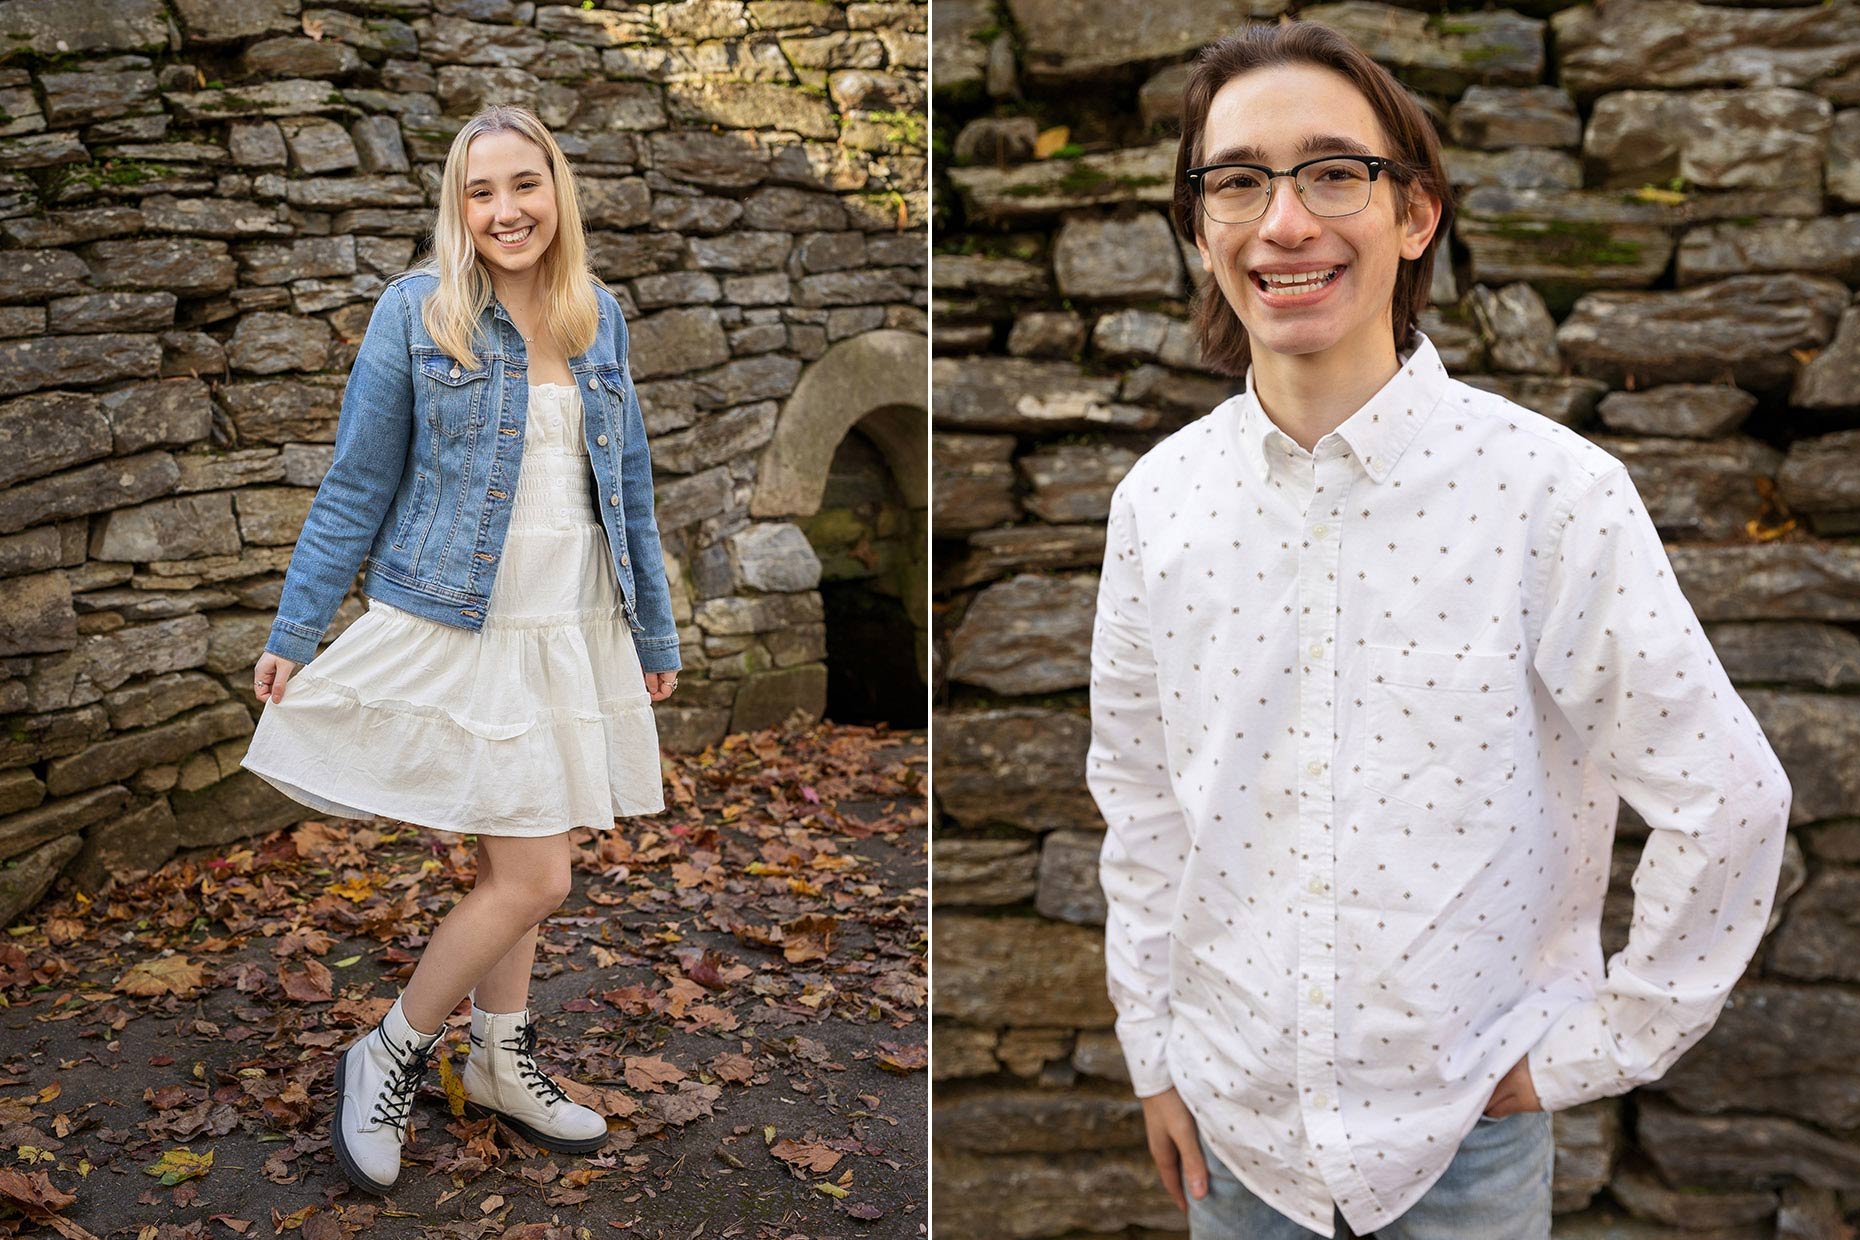 Senior photos for twins in front of a stone wall